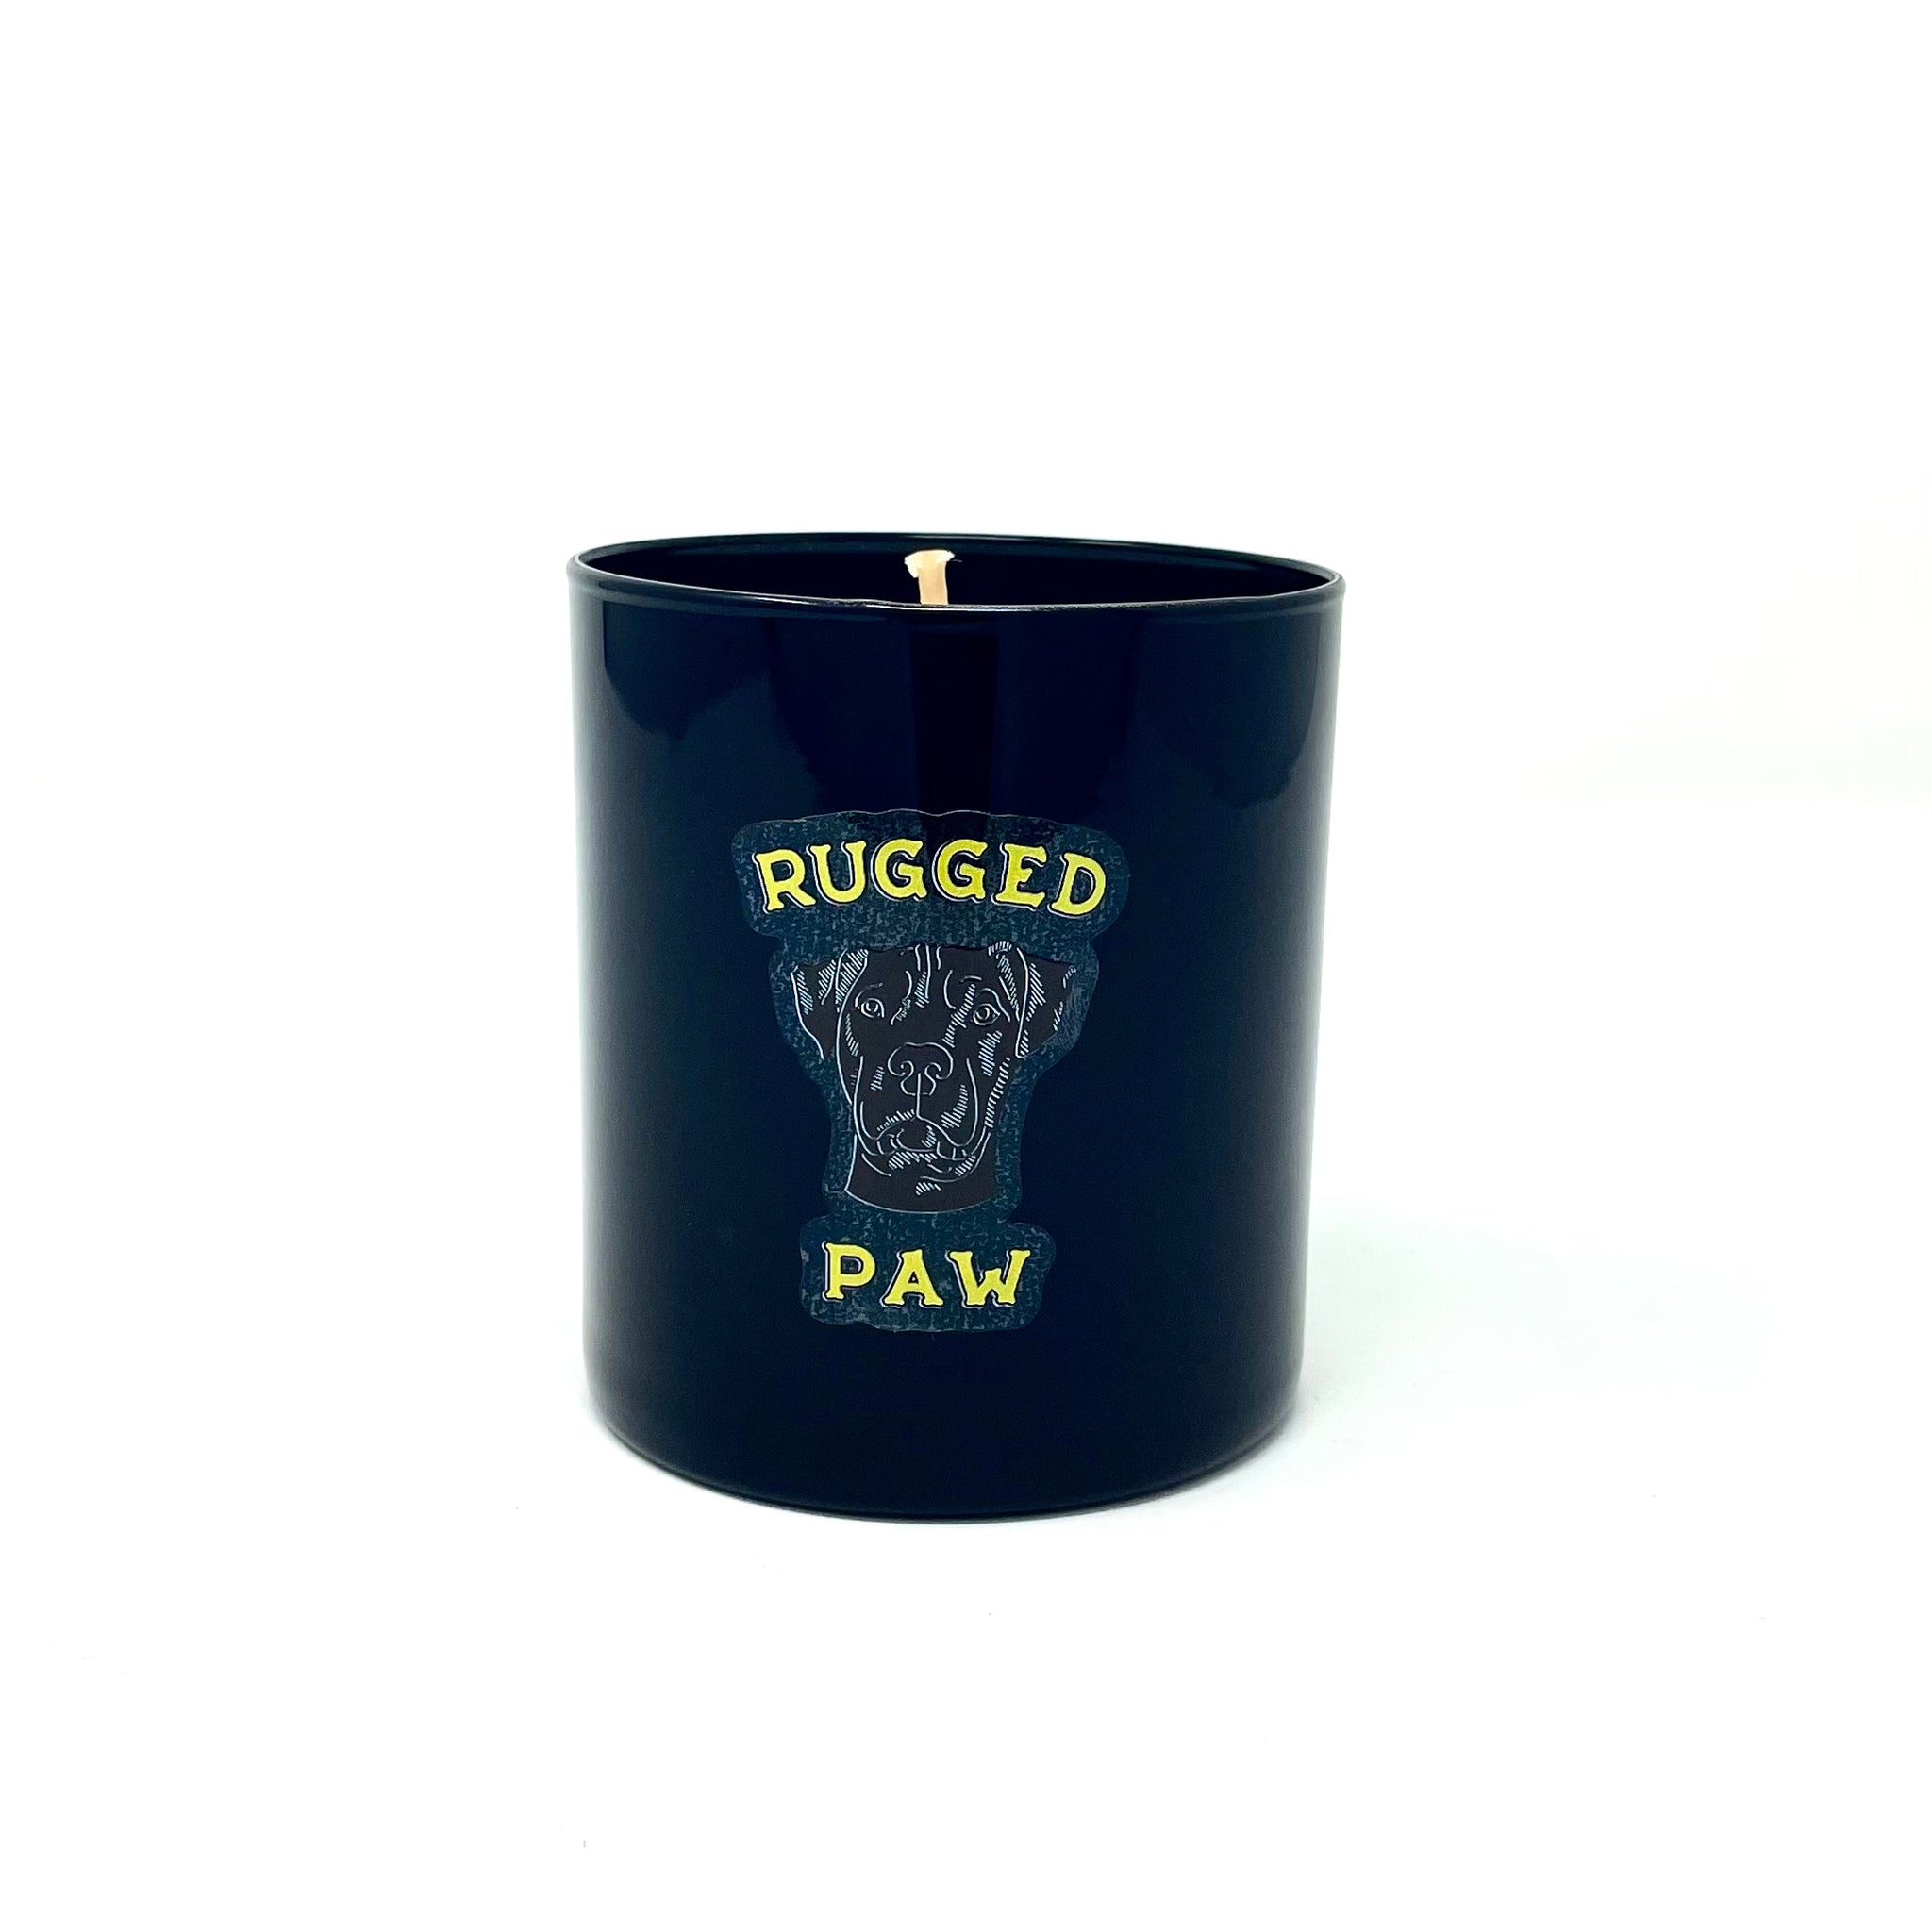 Rugged Paw Candle